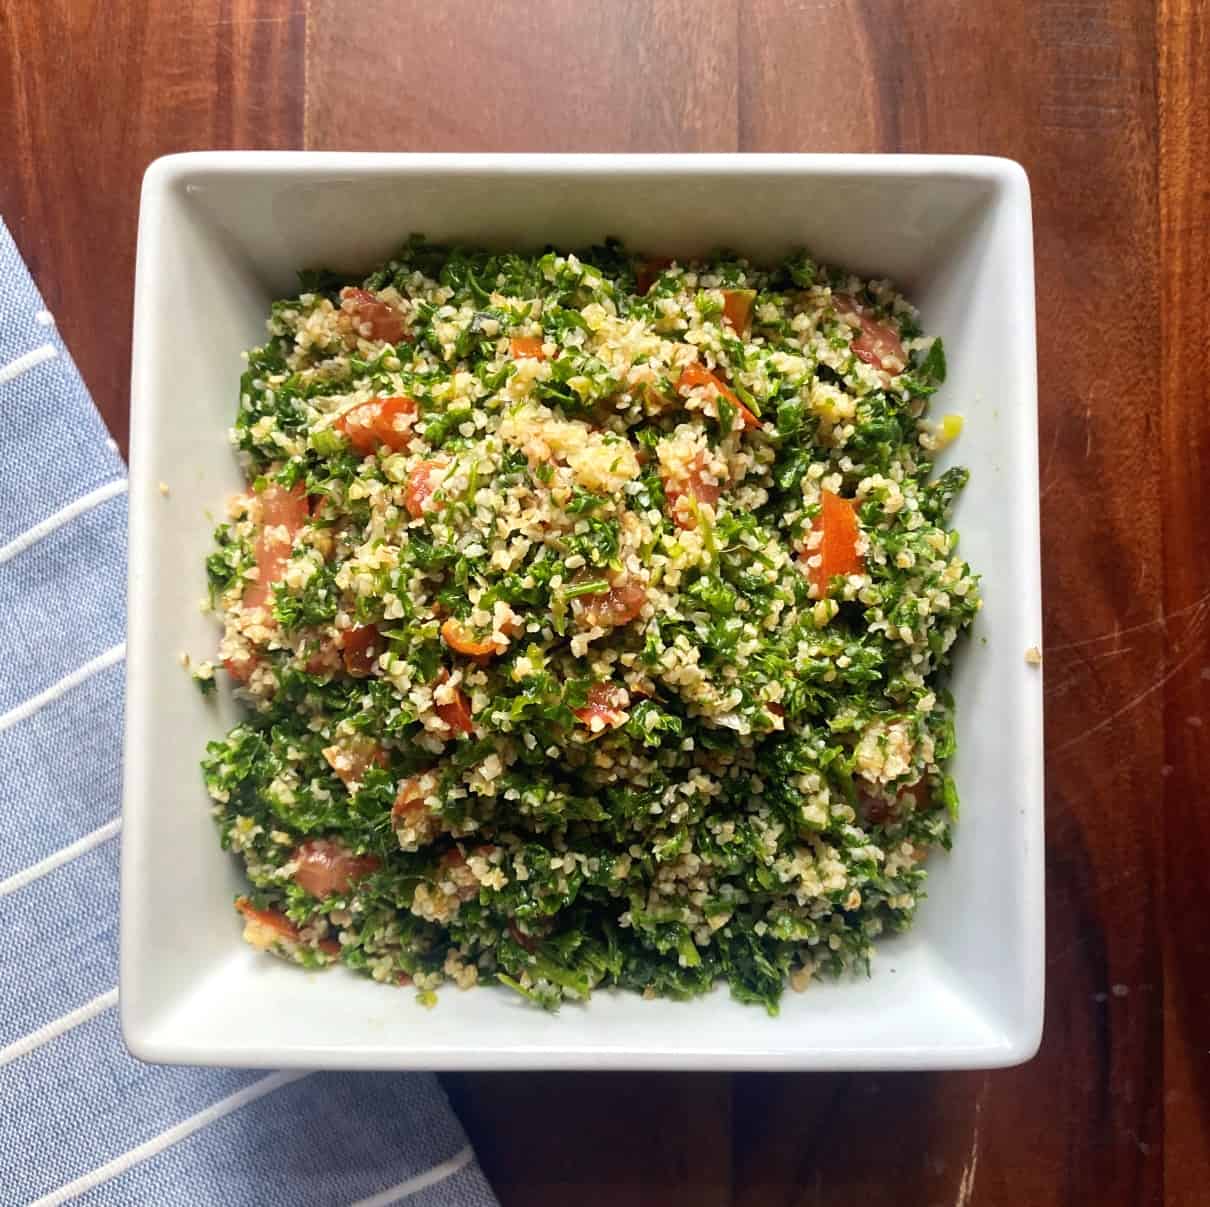 Tabouli salad chopped with an electrical food chopper. Salad is made with lots of parsley, mint, green onions, tomatoes, bulgur, lemon juice and olive oil.